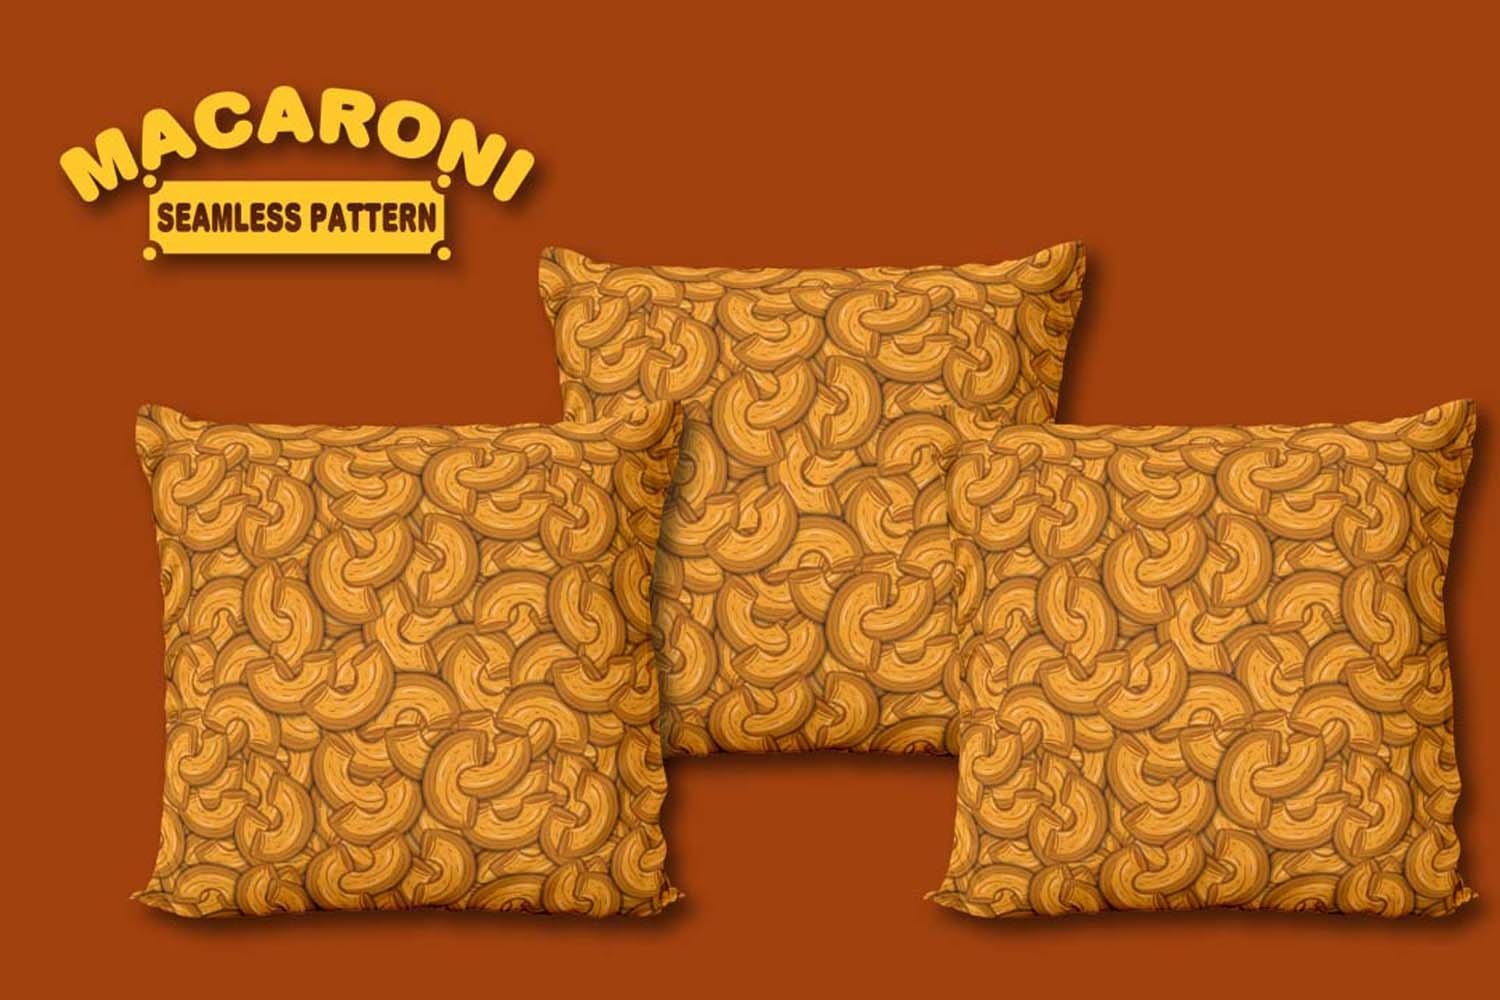 Prints on pillows with pasta.